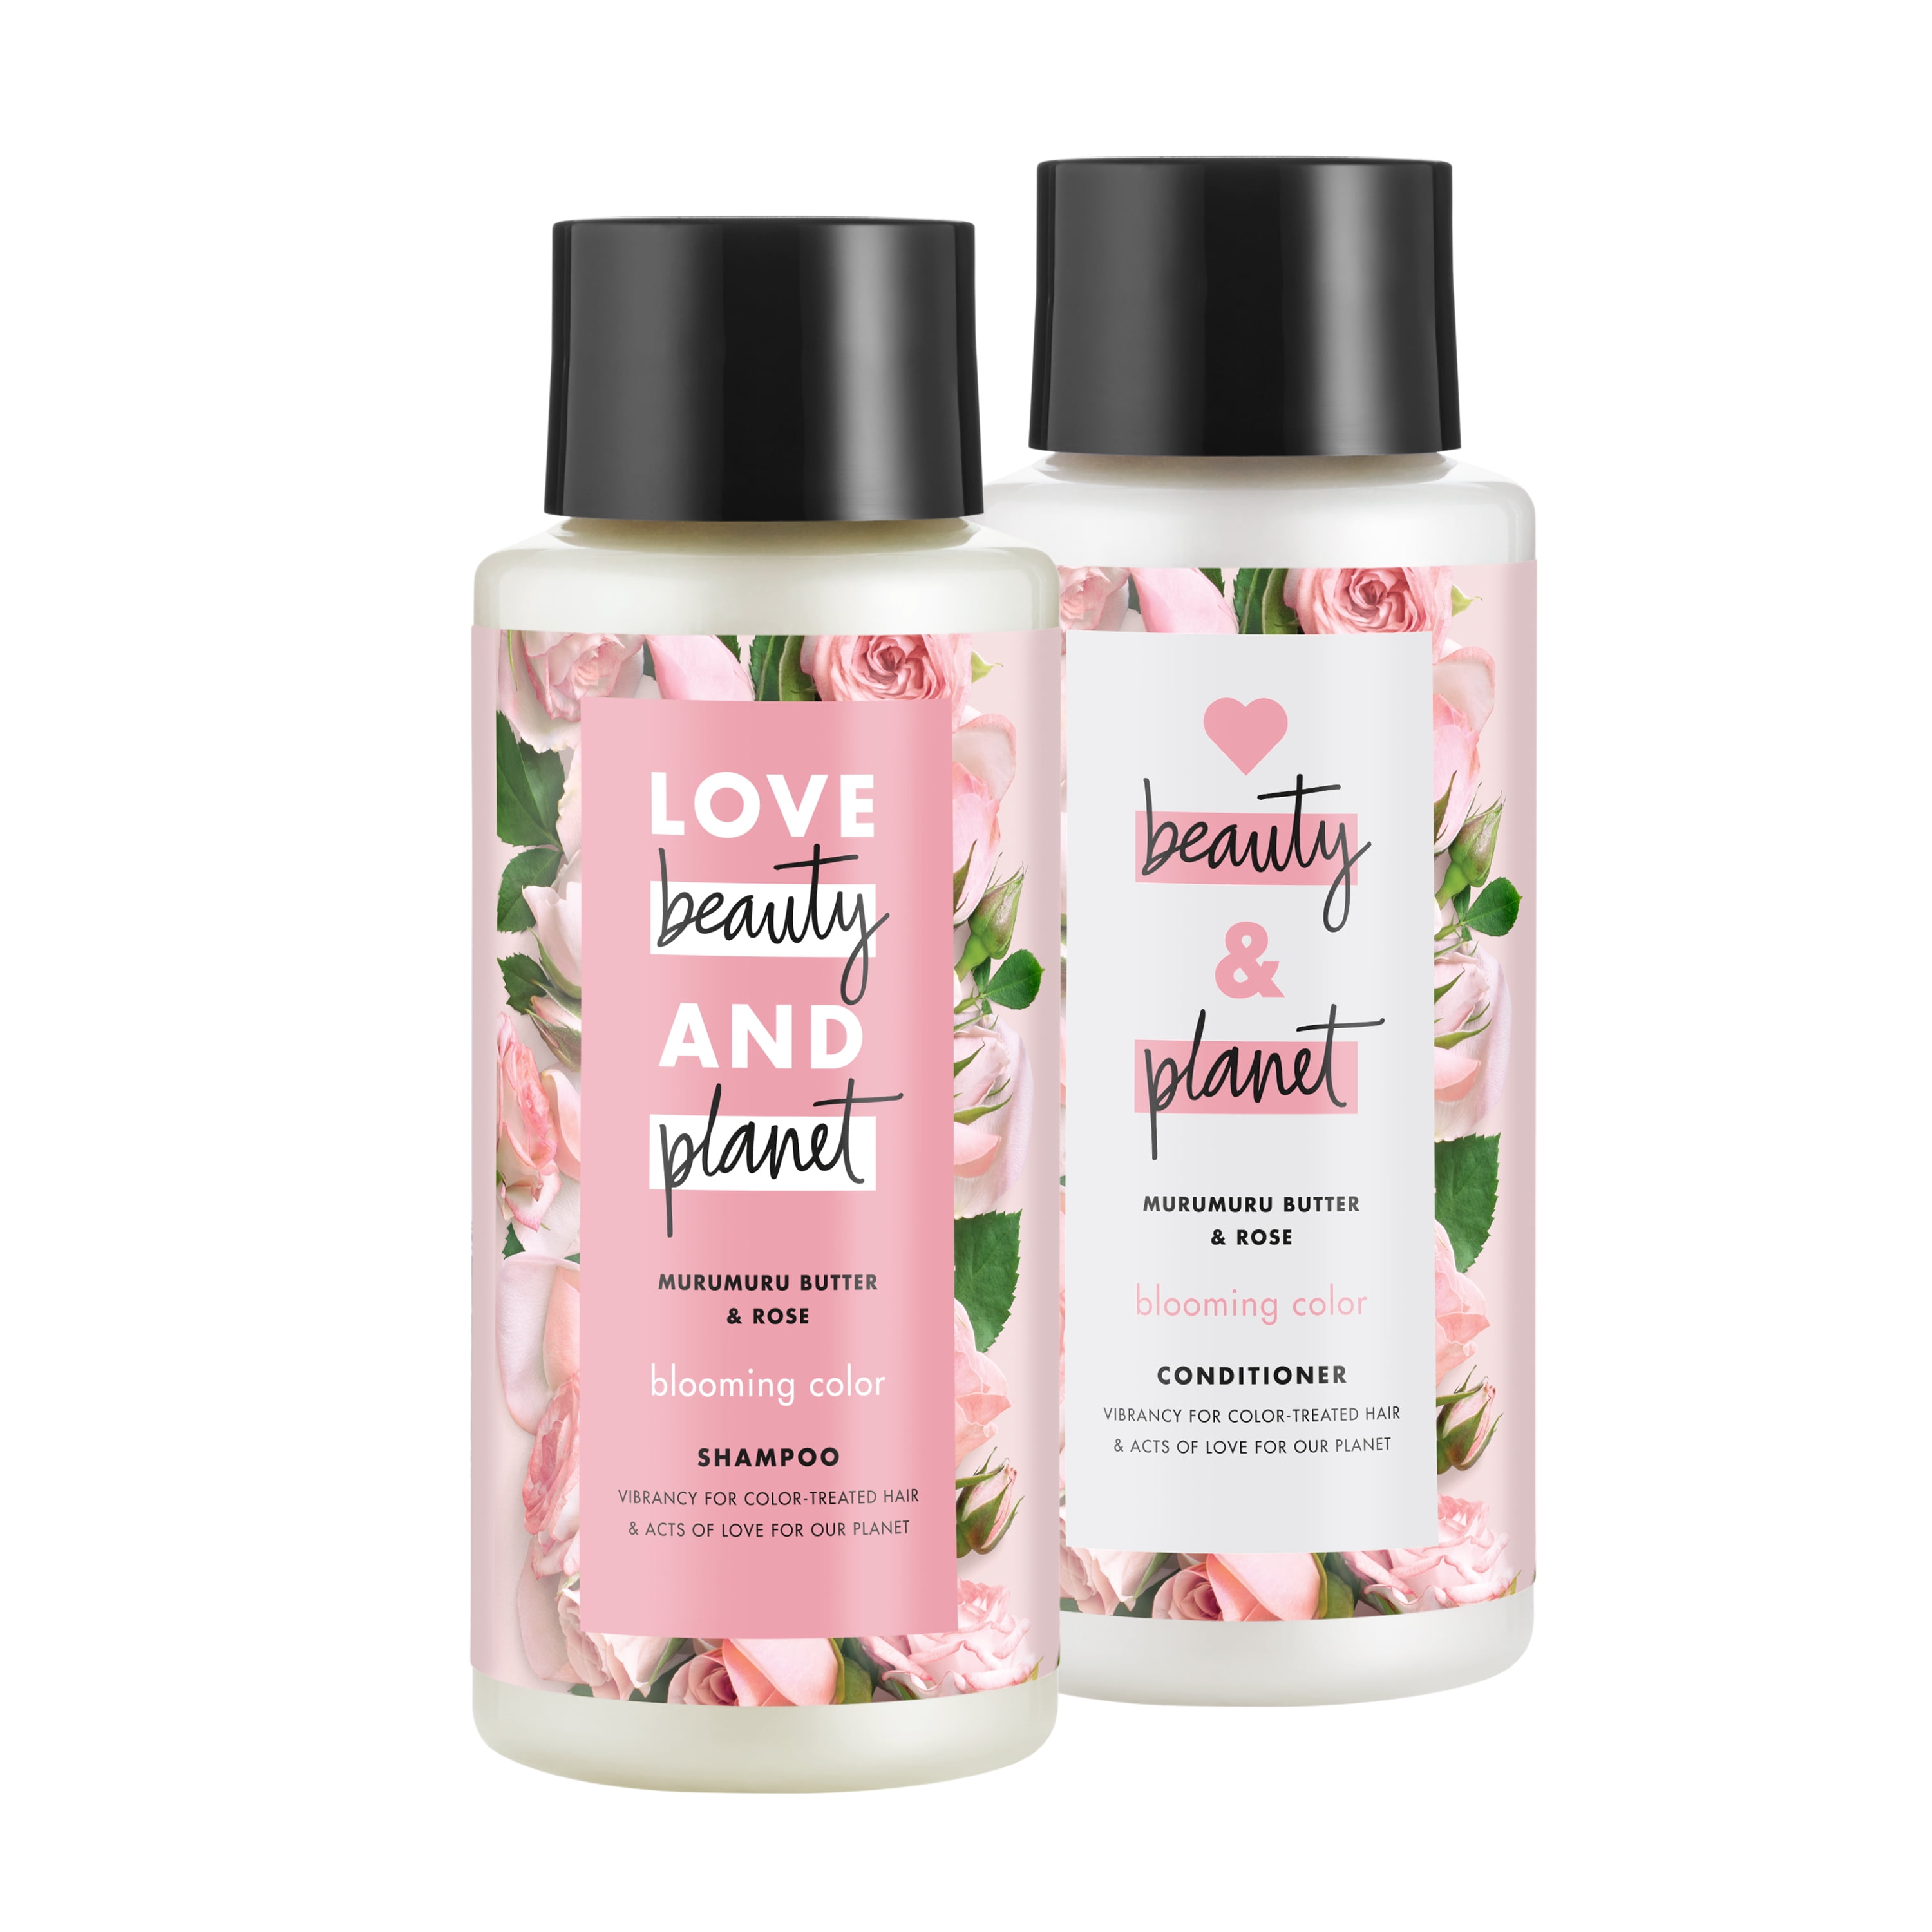 Mexico konstant kandidatskole Love Beauty and Planet Silicone Free, Paraben Free and Vegan, Rose Shampoo  and Conditioner for Color Treated Hair, 13.5 oz, 2 count - Walmart.com